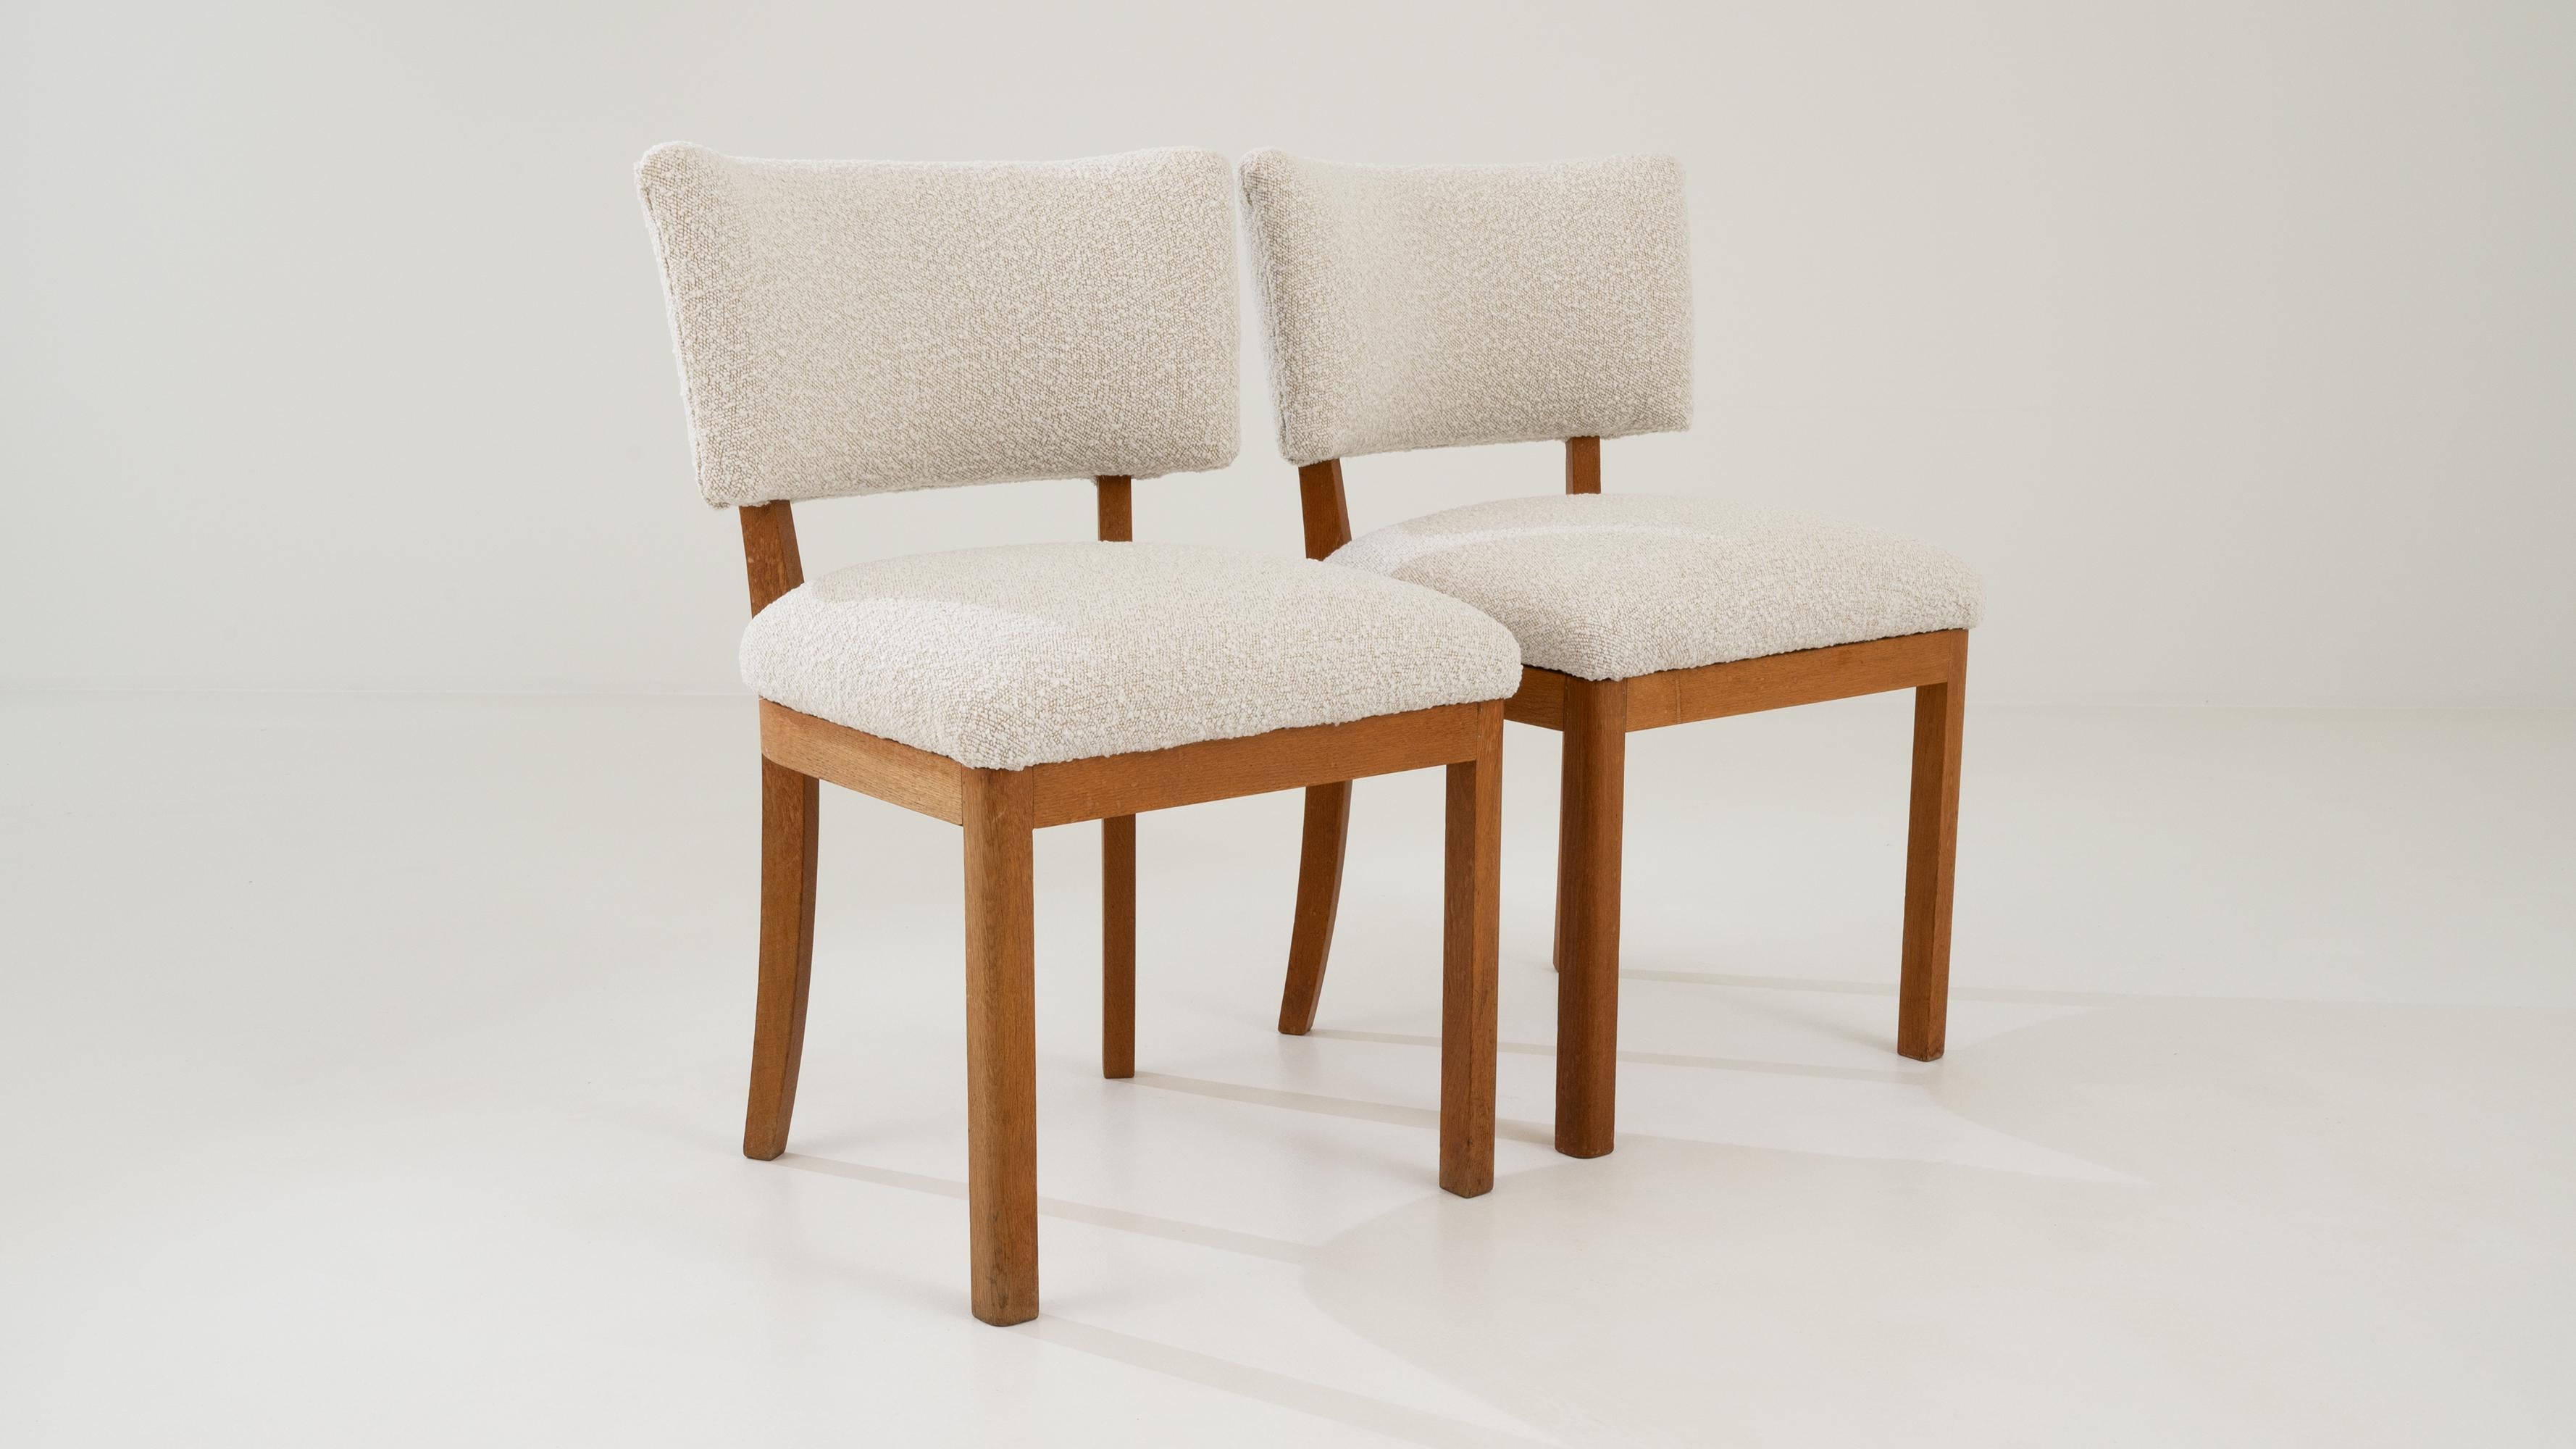 20th Century Czech Upholstered Dining Chairs, a Pair For Sale 7